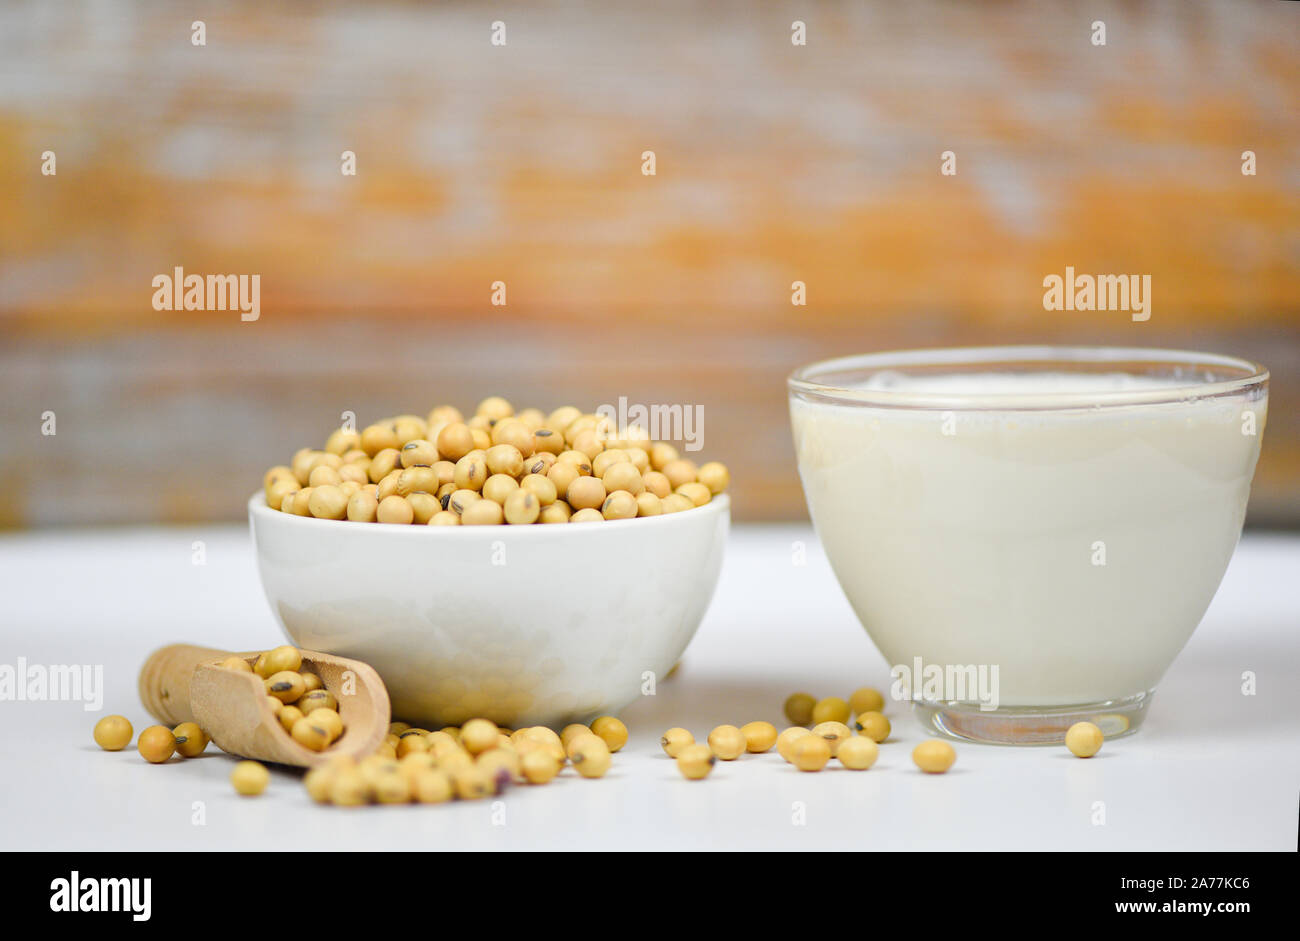 Soybean and dried soy beans on white bowl / Soy milk in glass for healthy diet drink and natural bean protein Stock Photo